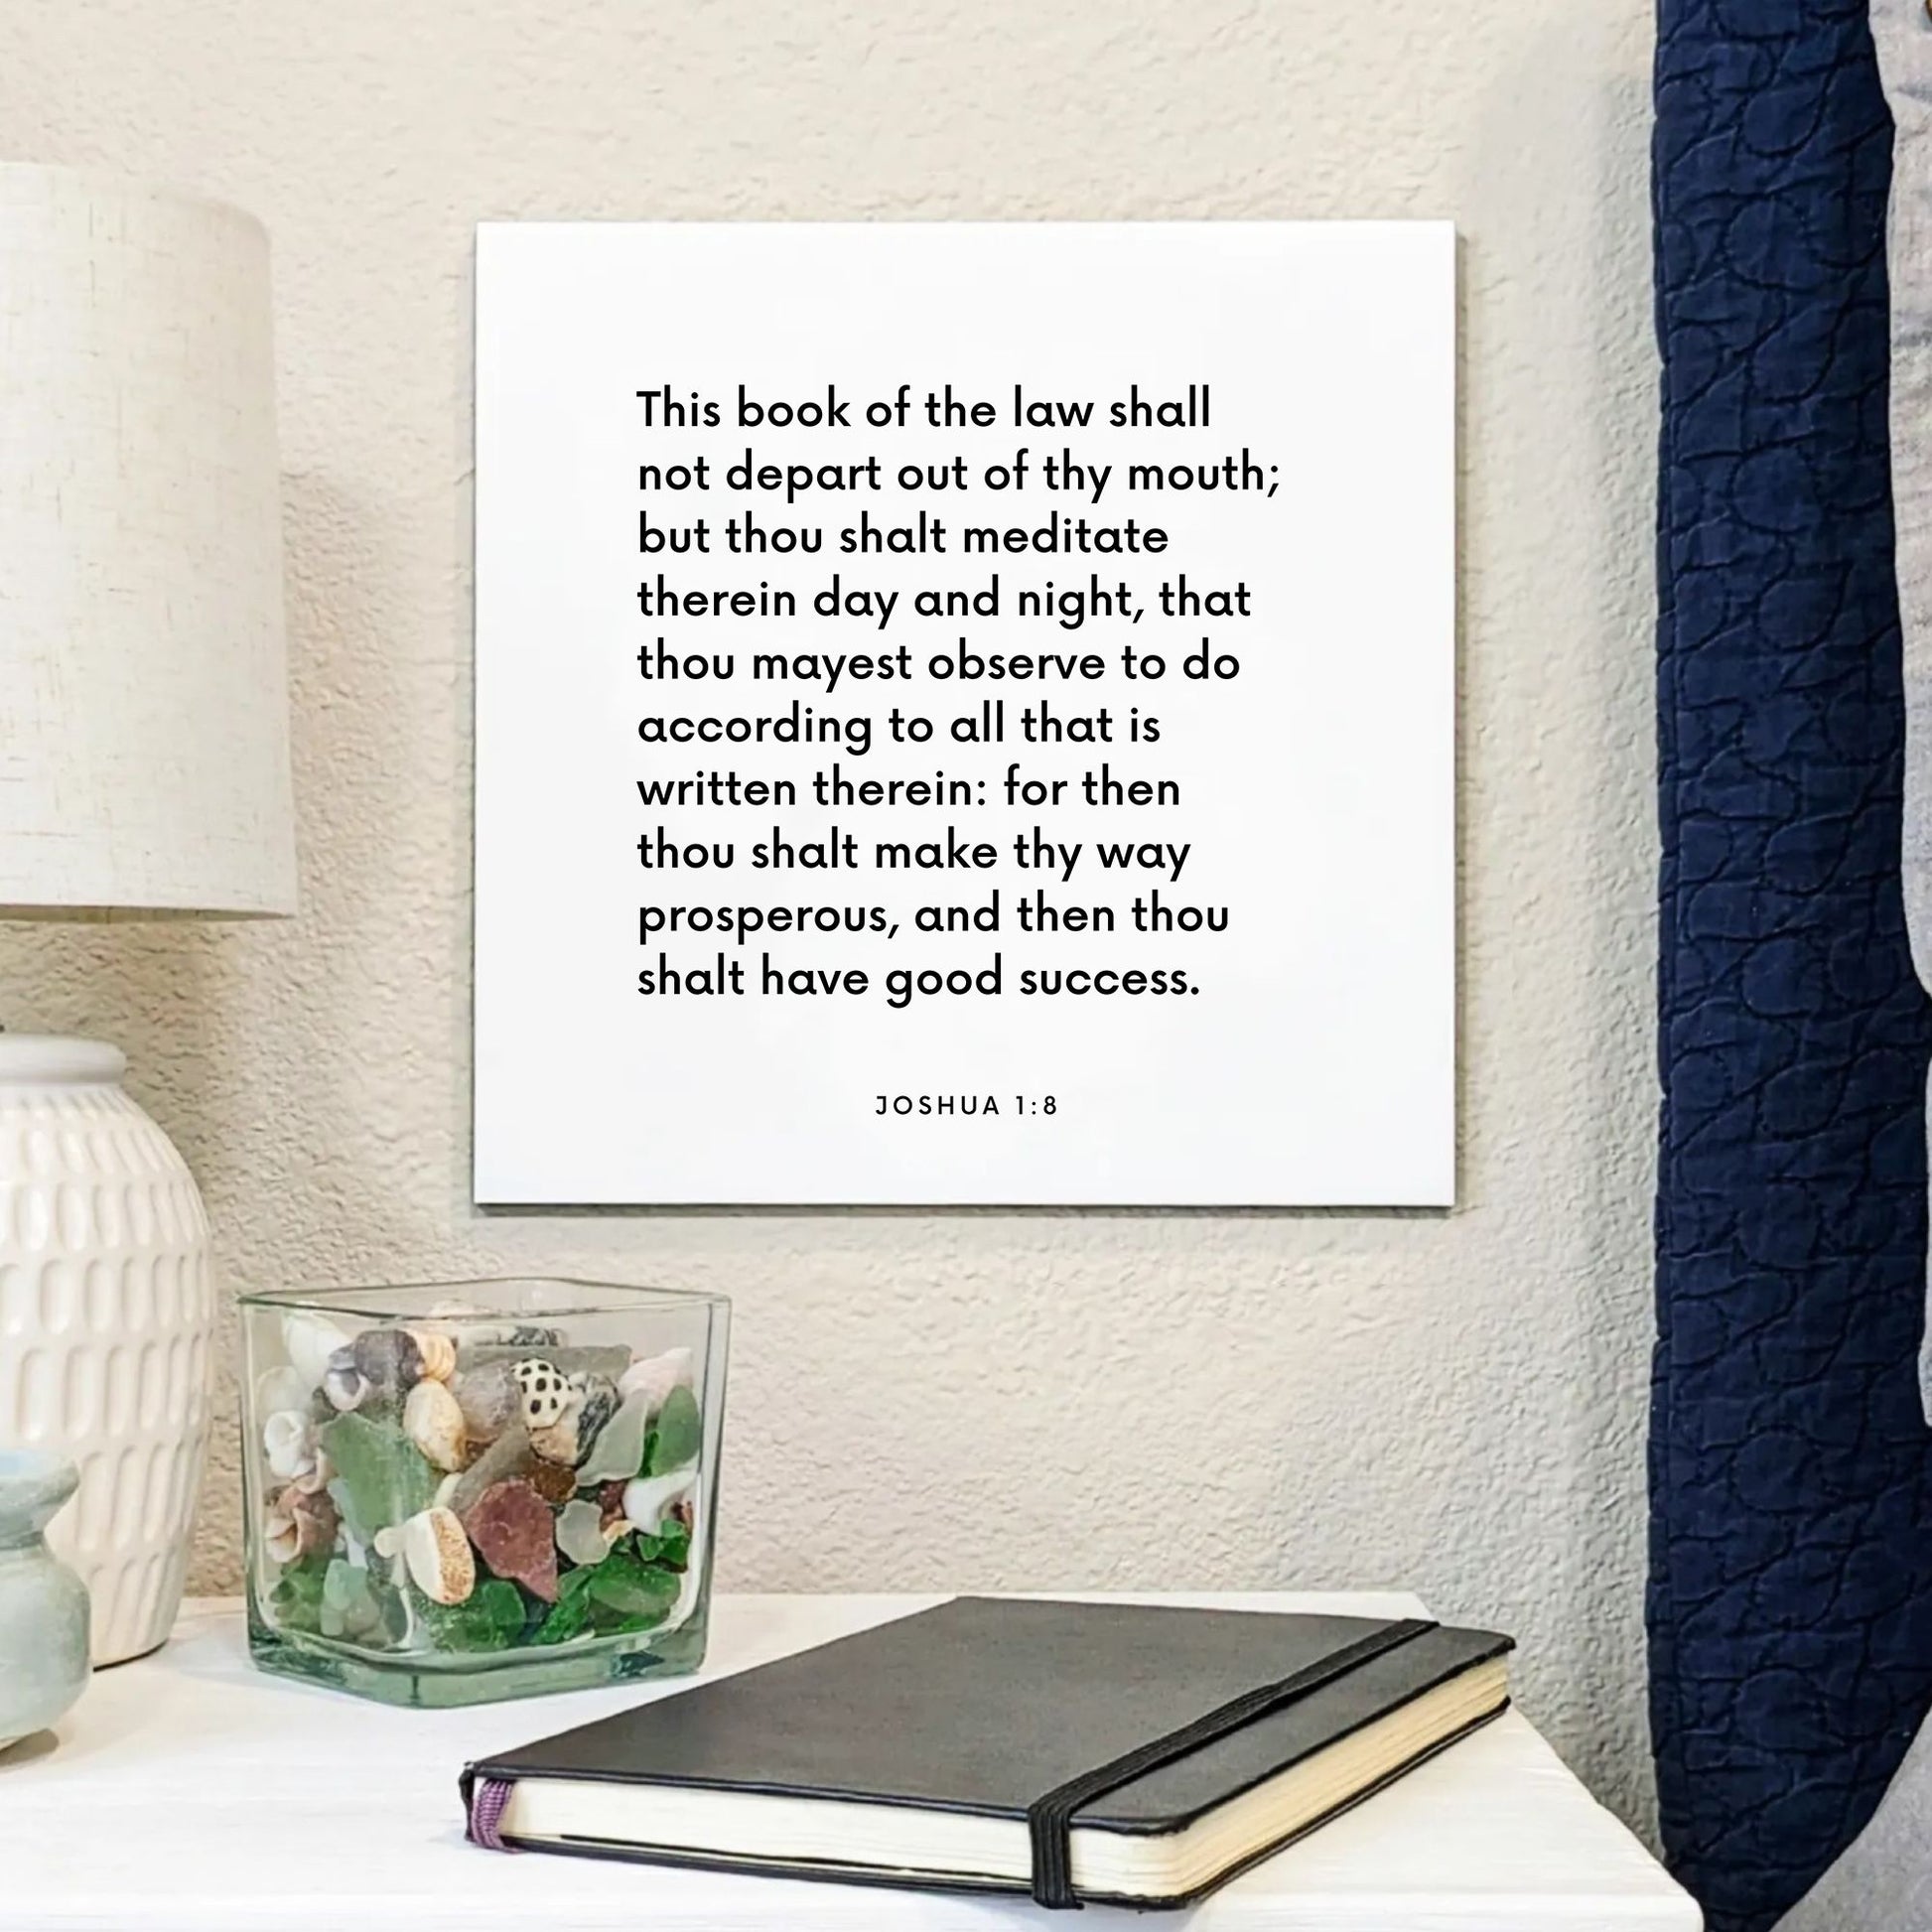 Bedside mouting of the scripture tile for Joshua 1:8 - "Thou shalt meditate therein day and night"